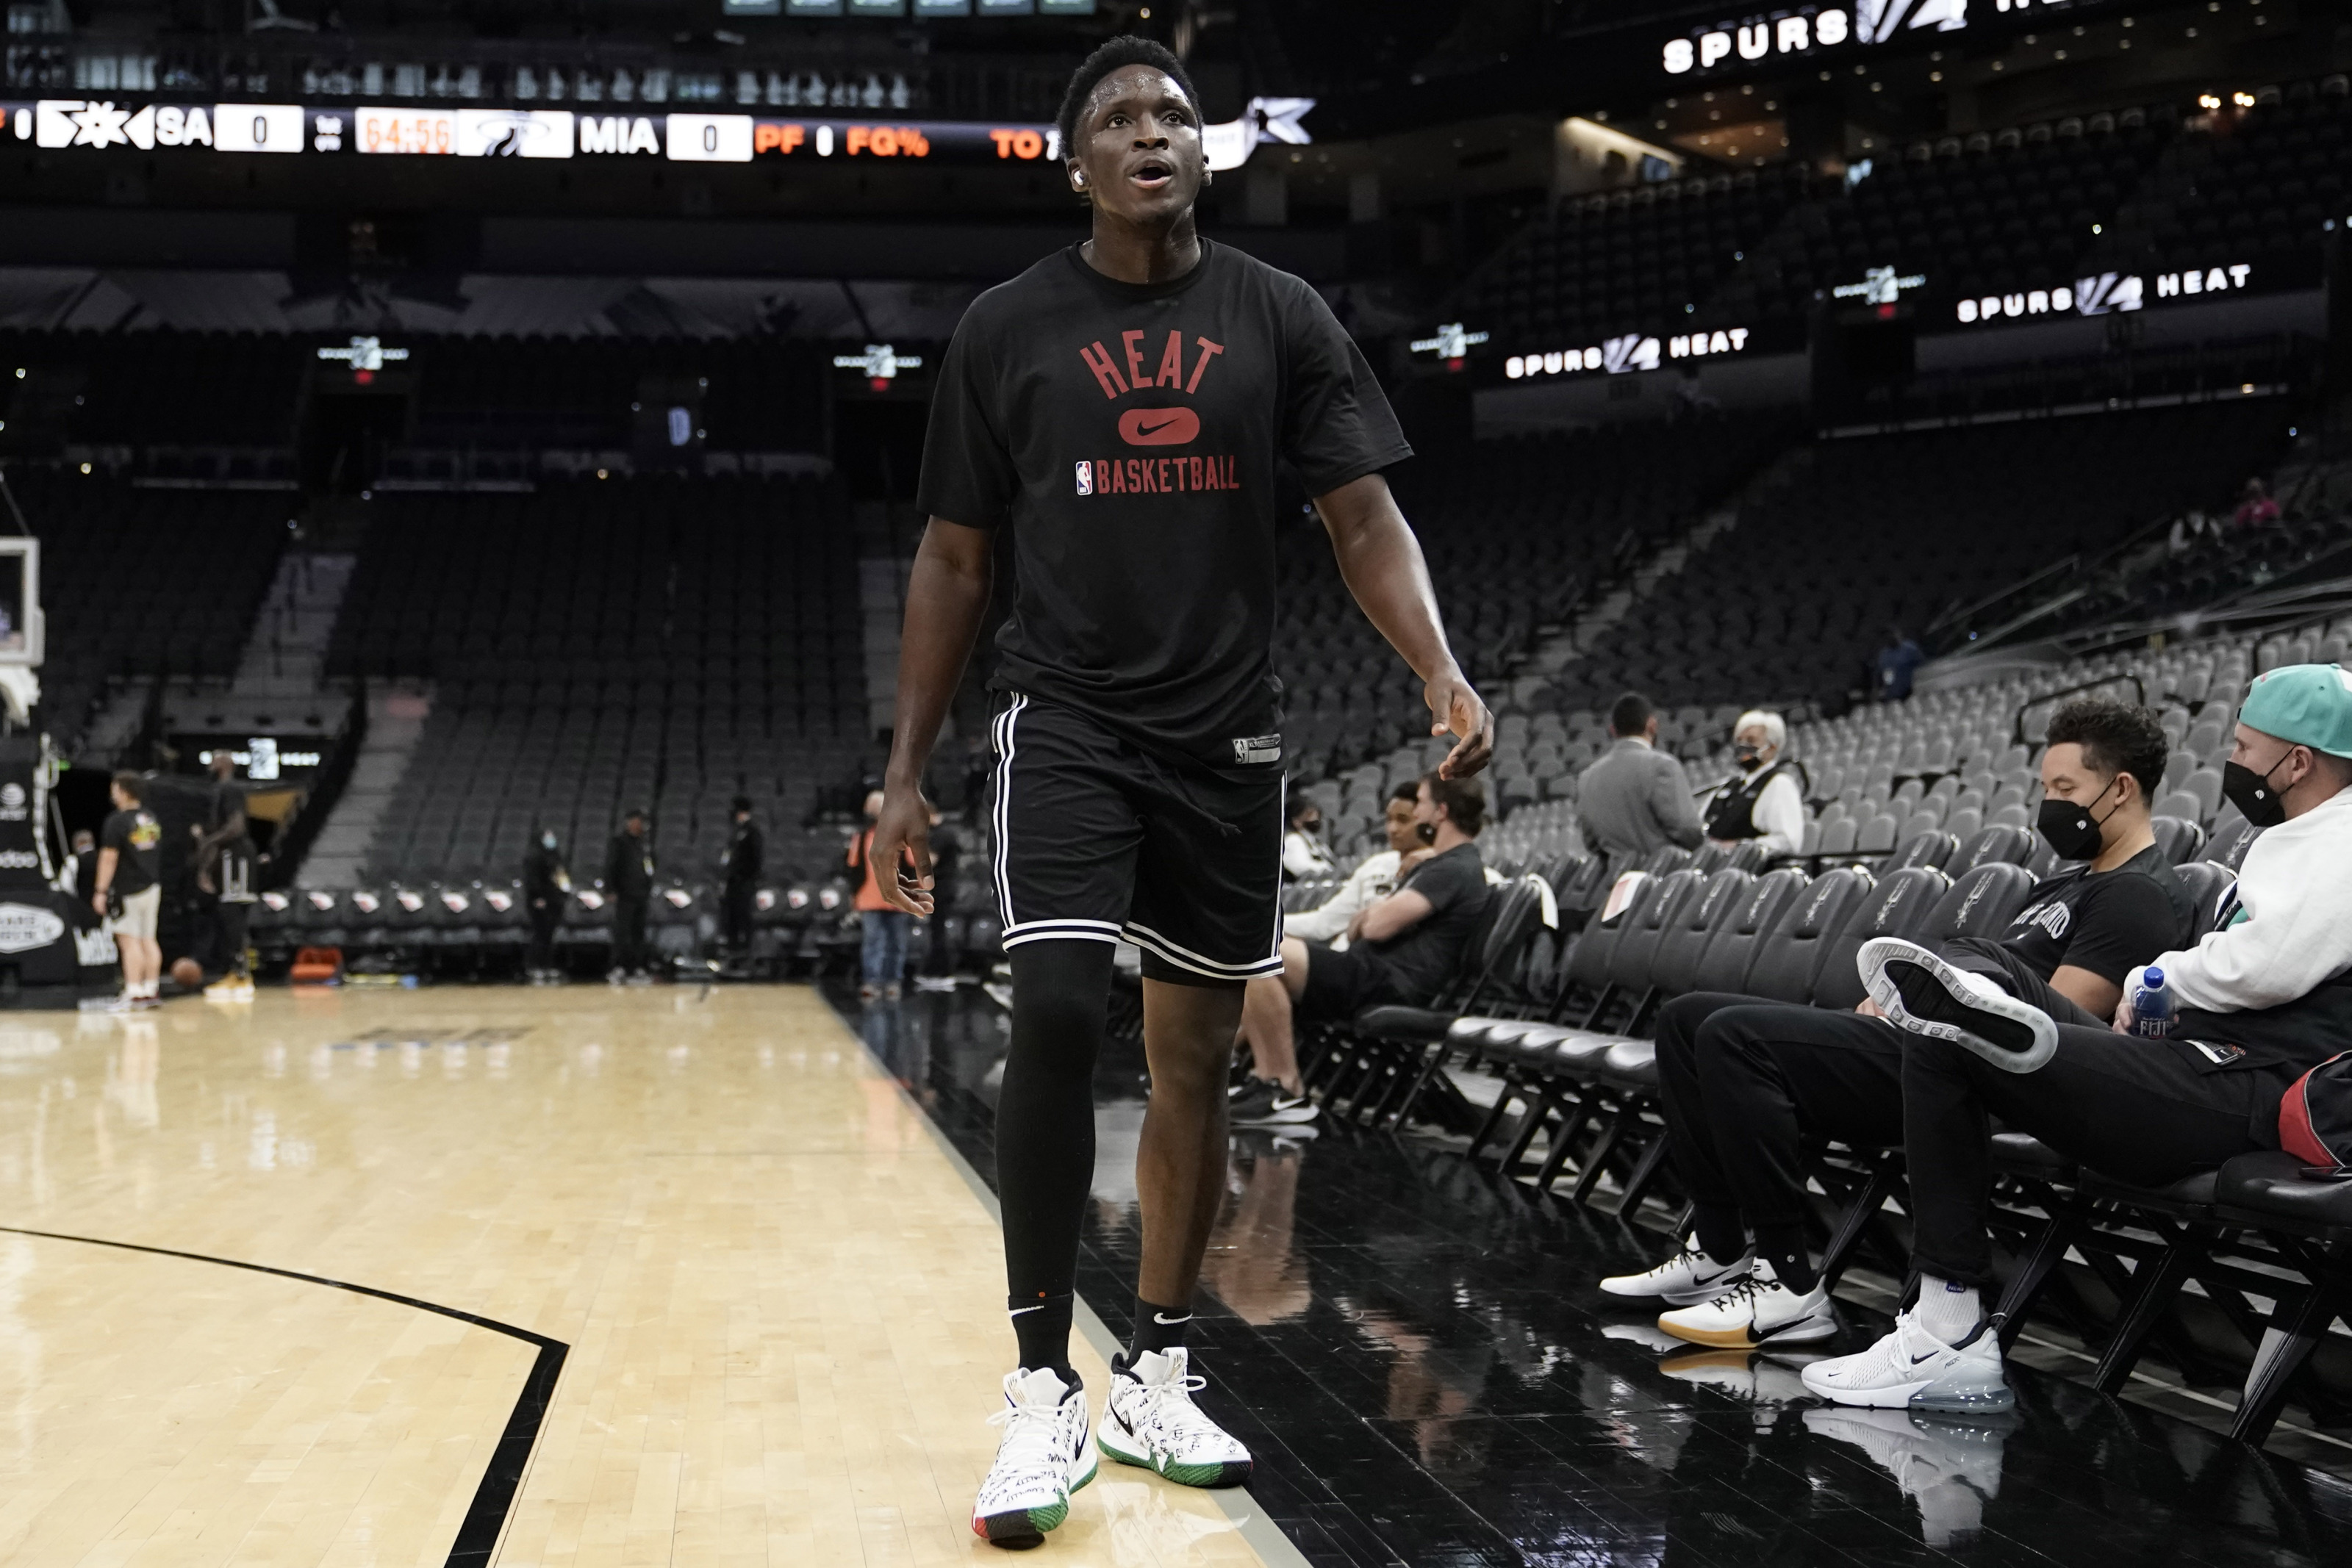 At last, Oladipo finally gets his chance to play with Heat